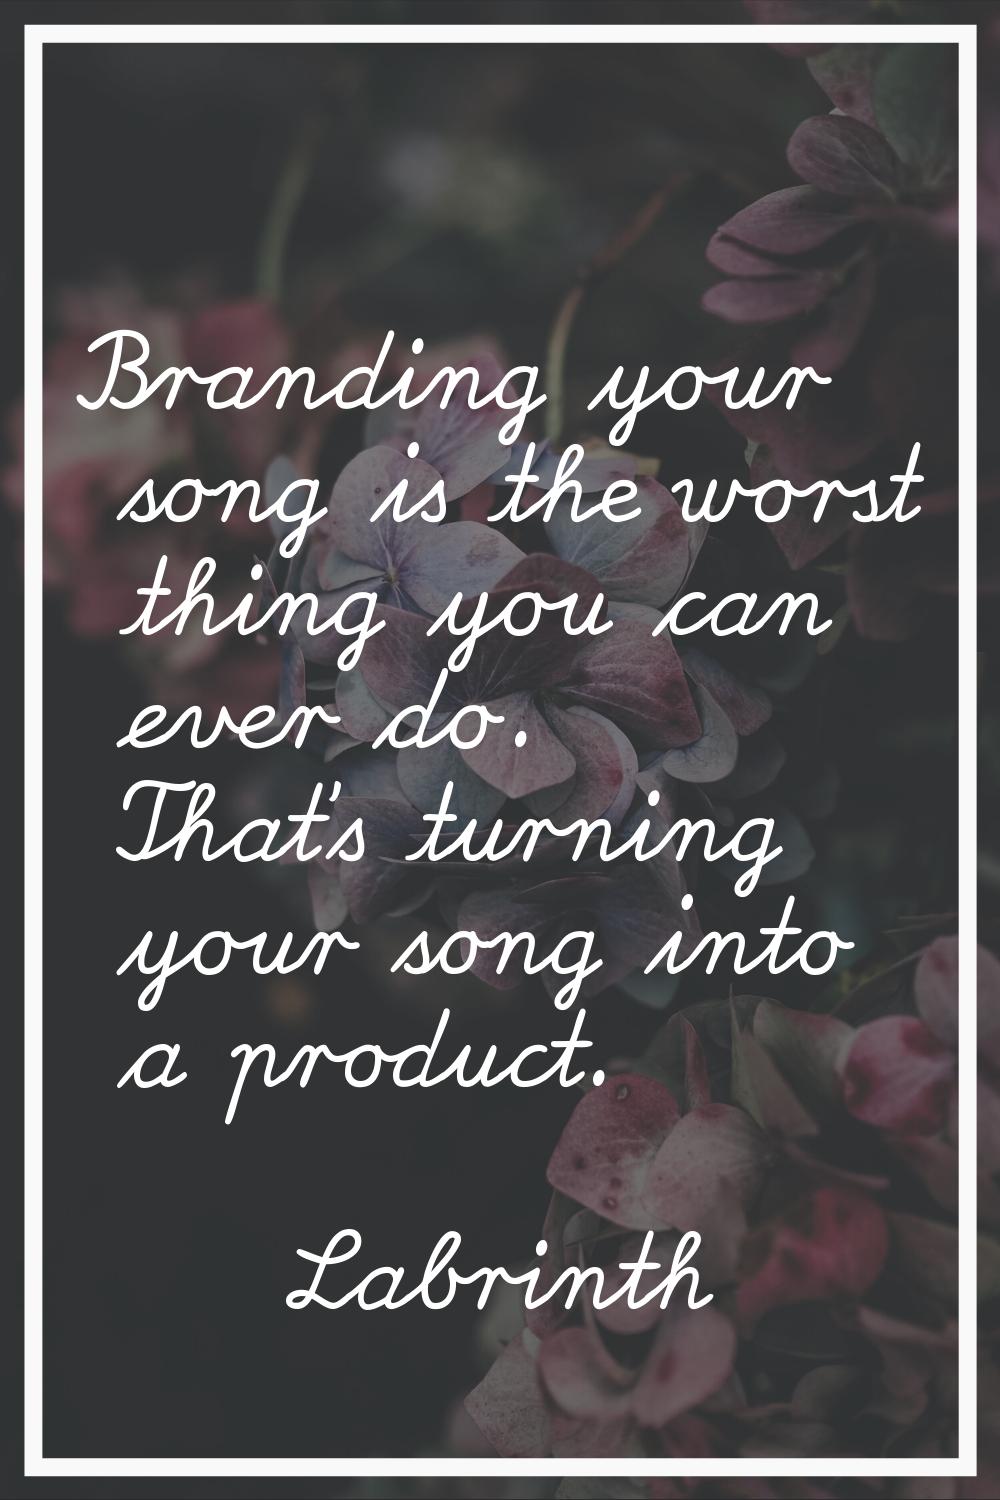 Branding your song is the worst thing you can ever do. That's turning your song into a product.